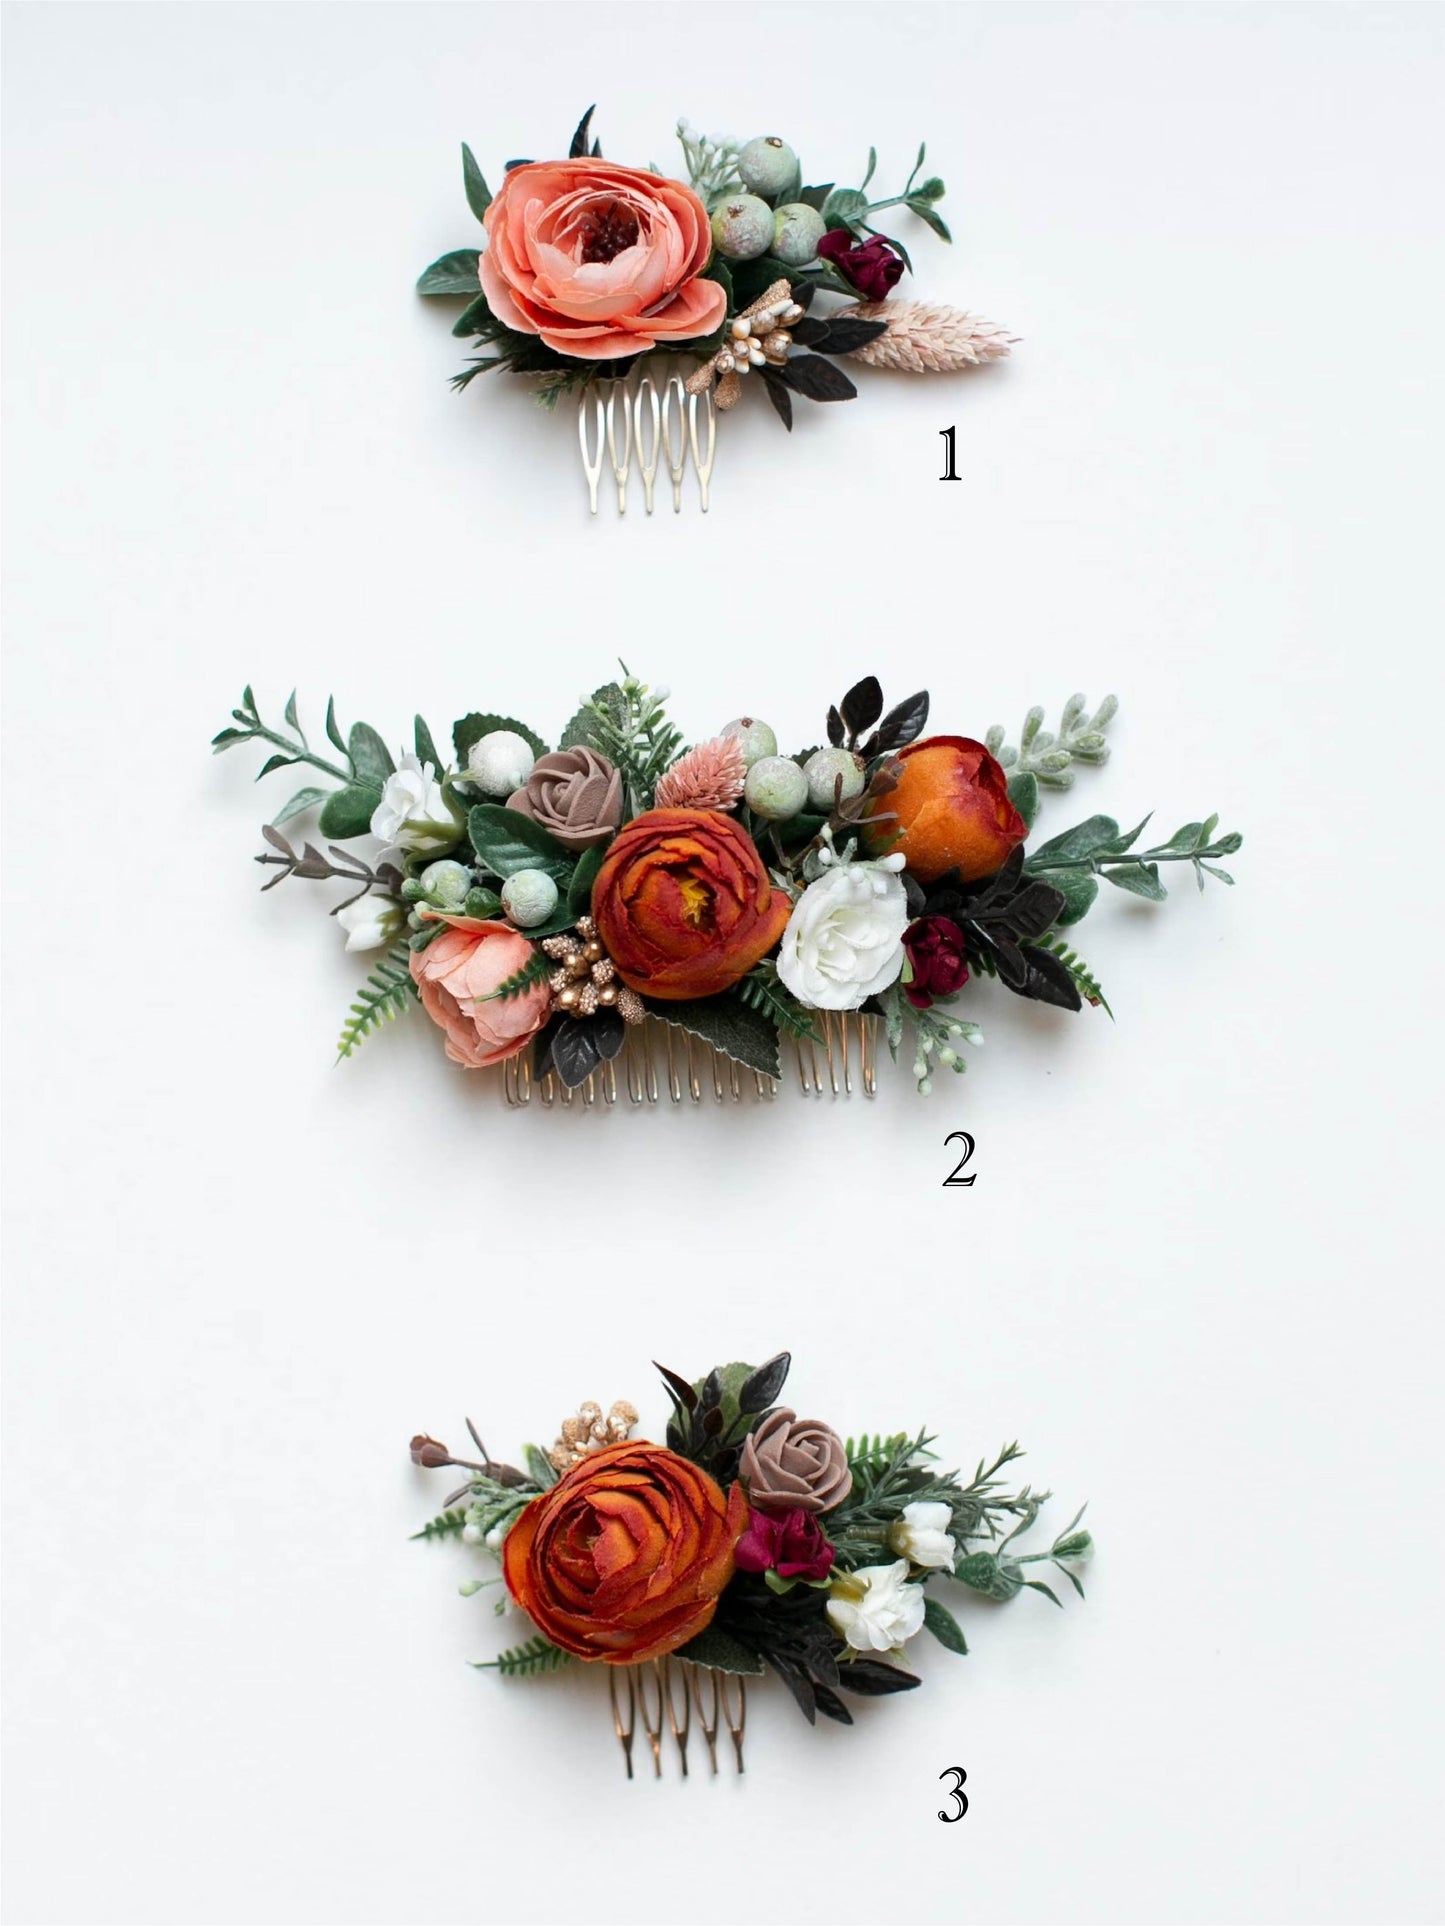 wedding flower comb, bridal flower comb, blush flower comb, boho flower comb, bridal flower comb, rustic wedding comb, bridesmaid comb, bride hair comb, holiday hair comb, burgundy floral comb, girl hair comb, nude flower comb, pastel flower comb, pink hair comb, greenery hair piece, mini hair comb, flower hair comb, orange flower comb, pink flower comb, grey flower comb, light pink comb, ivory hair piece, vintage bridal comb, outdoor wedding, floral comb bride